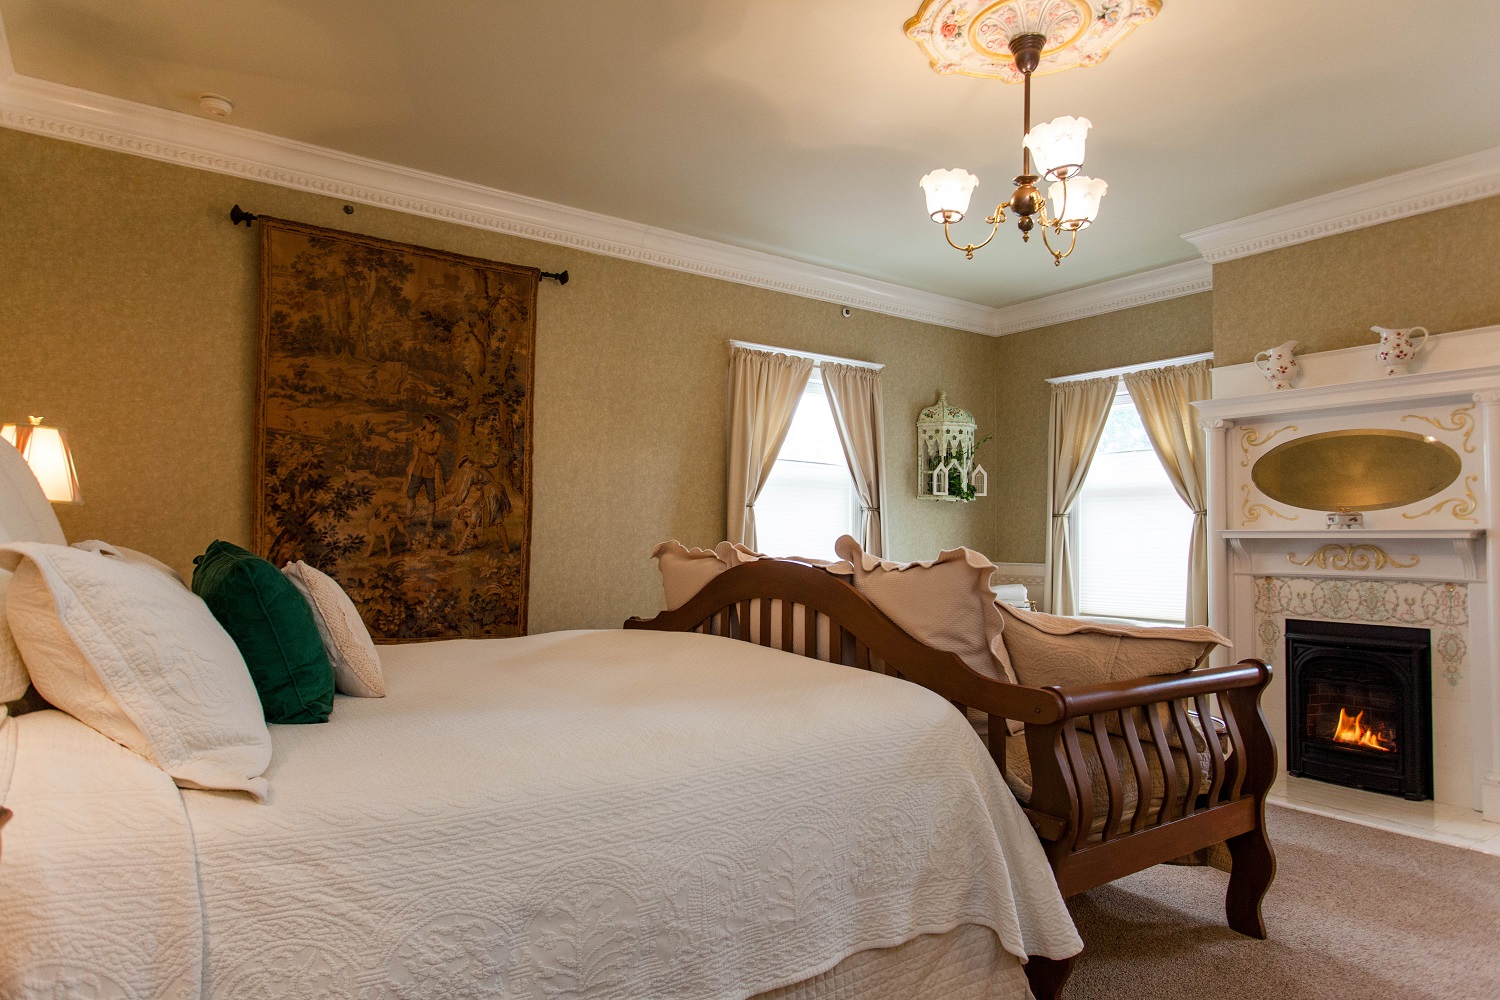 Stay in the Rutherford Room at our inn and indulge in Anette's Chocolates